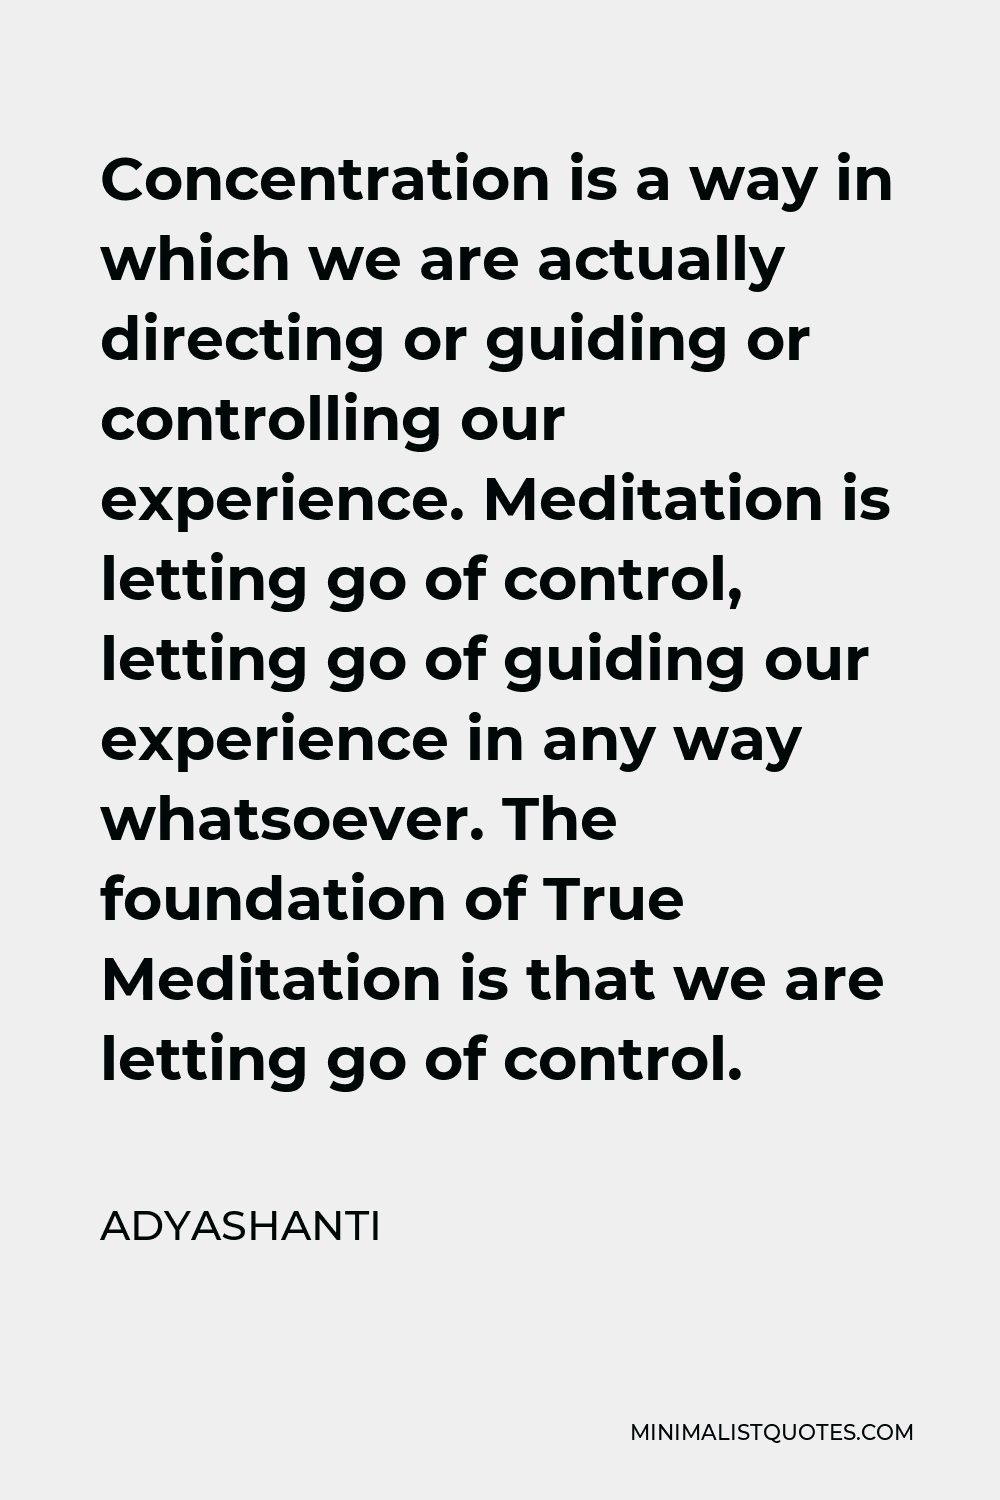 Adyashanti Quote - Concentration is a way in which we are actually directing or guiding or controlling our experience. Meditation is letting go of control, letting go of guiding our experience in any way whatsoever. The foundation of True Meditation is that we are letting go of control.